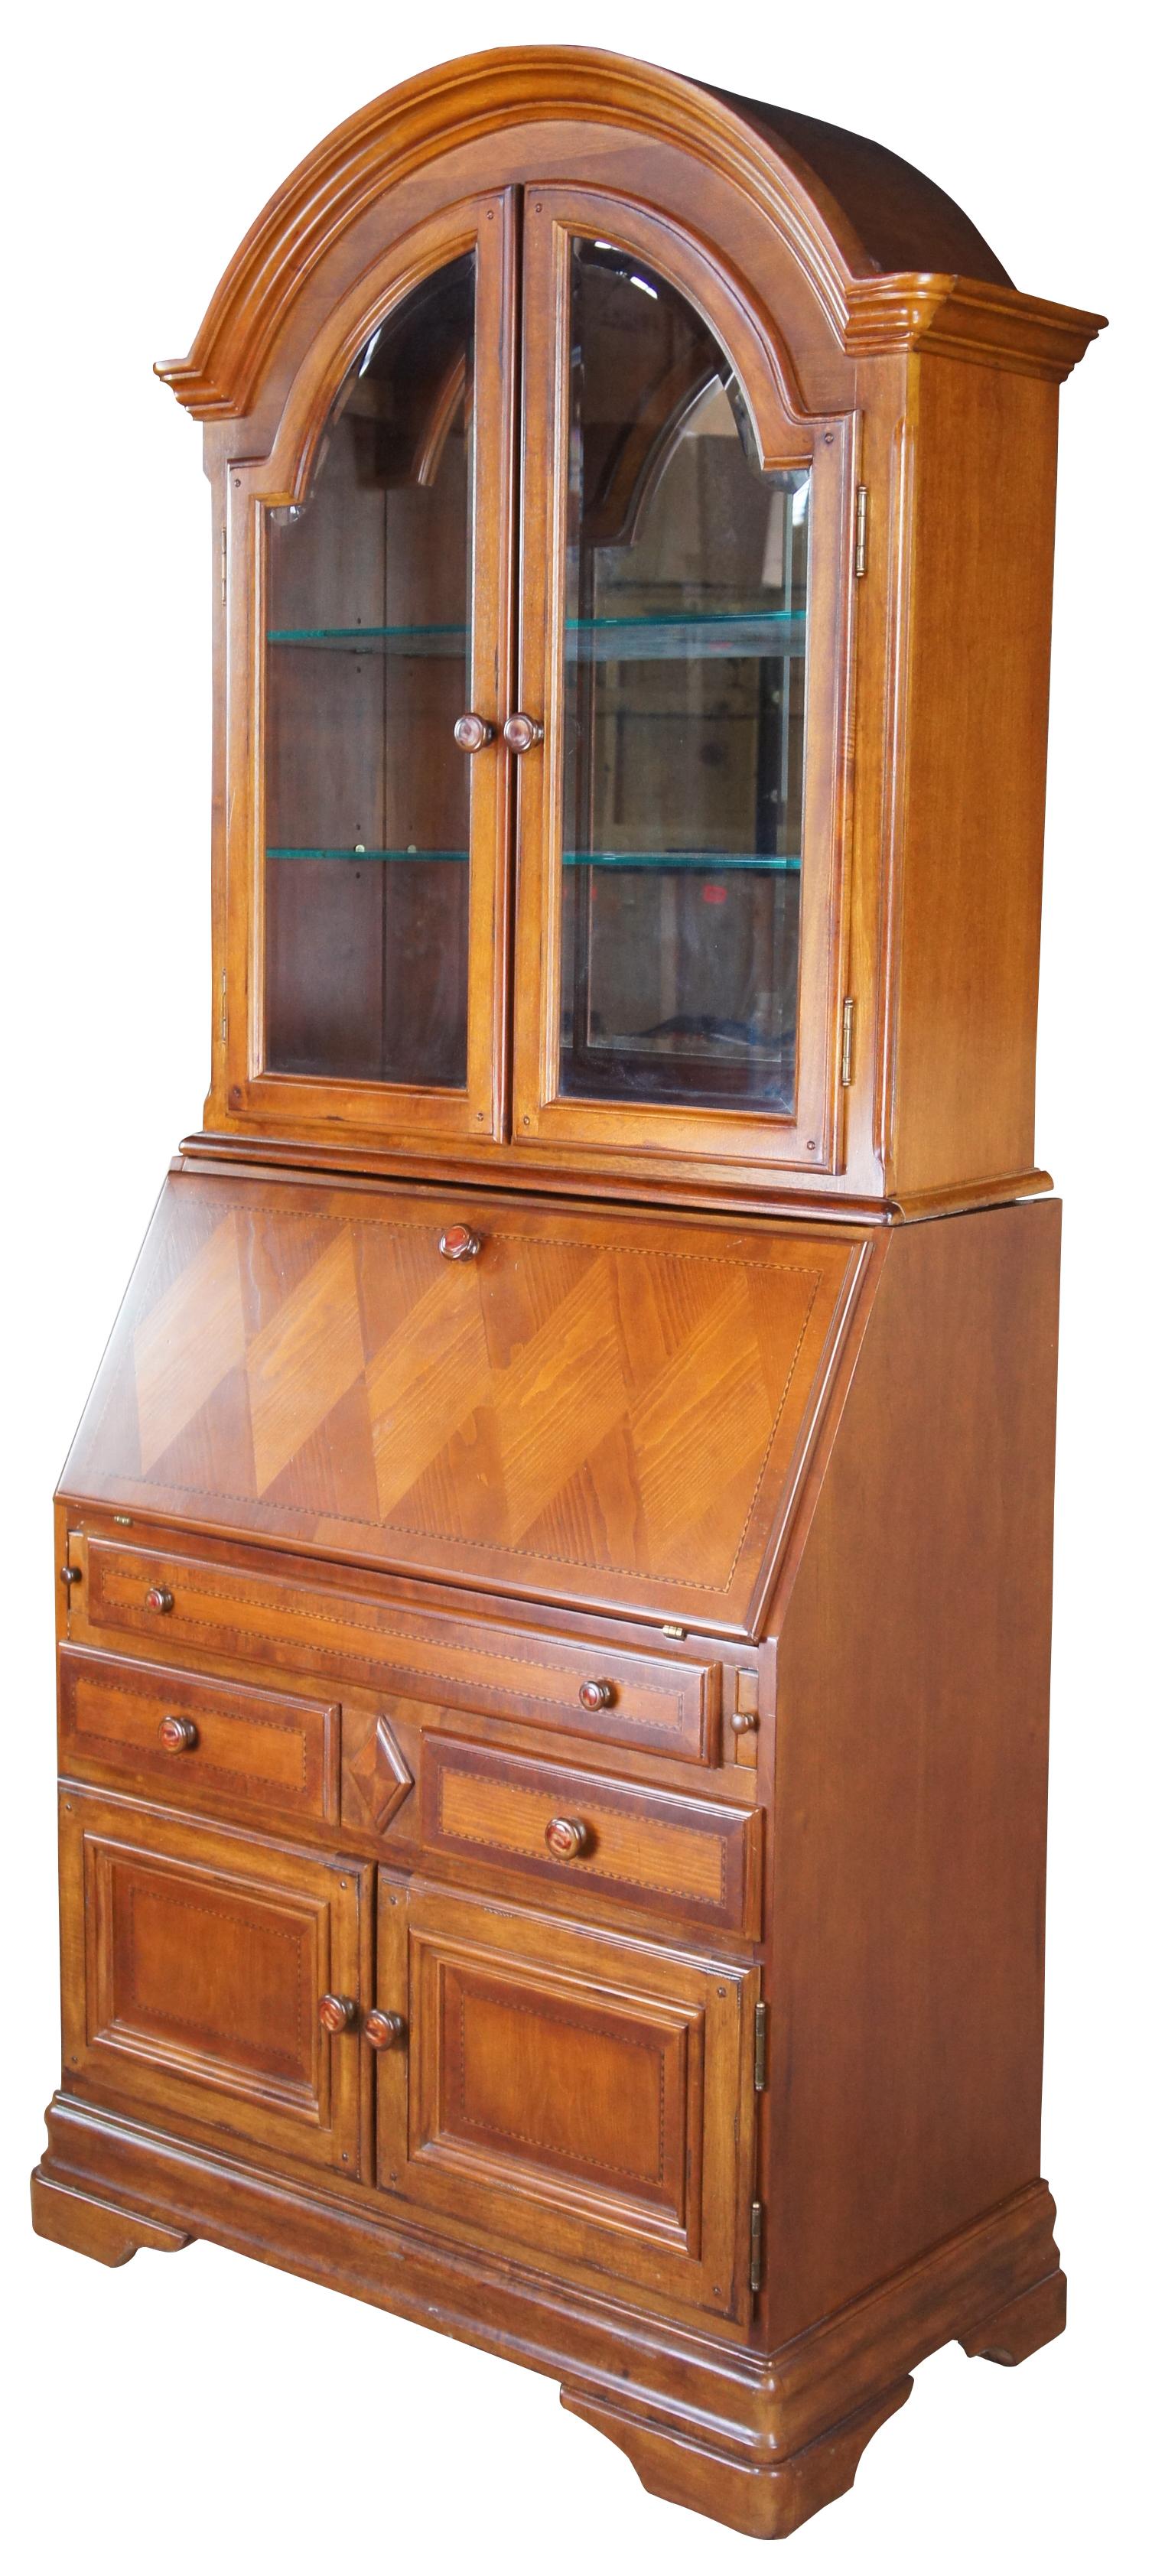 Vintage Alexander Julian Home Colours secretary desk cabinet. Made of cherry featuring an arched or domed top, mirrored back, two adjustable glass shelves, and beveled glass door fronts. The base cabinet features a drop front secretary with diamond